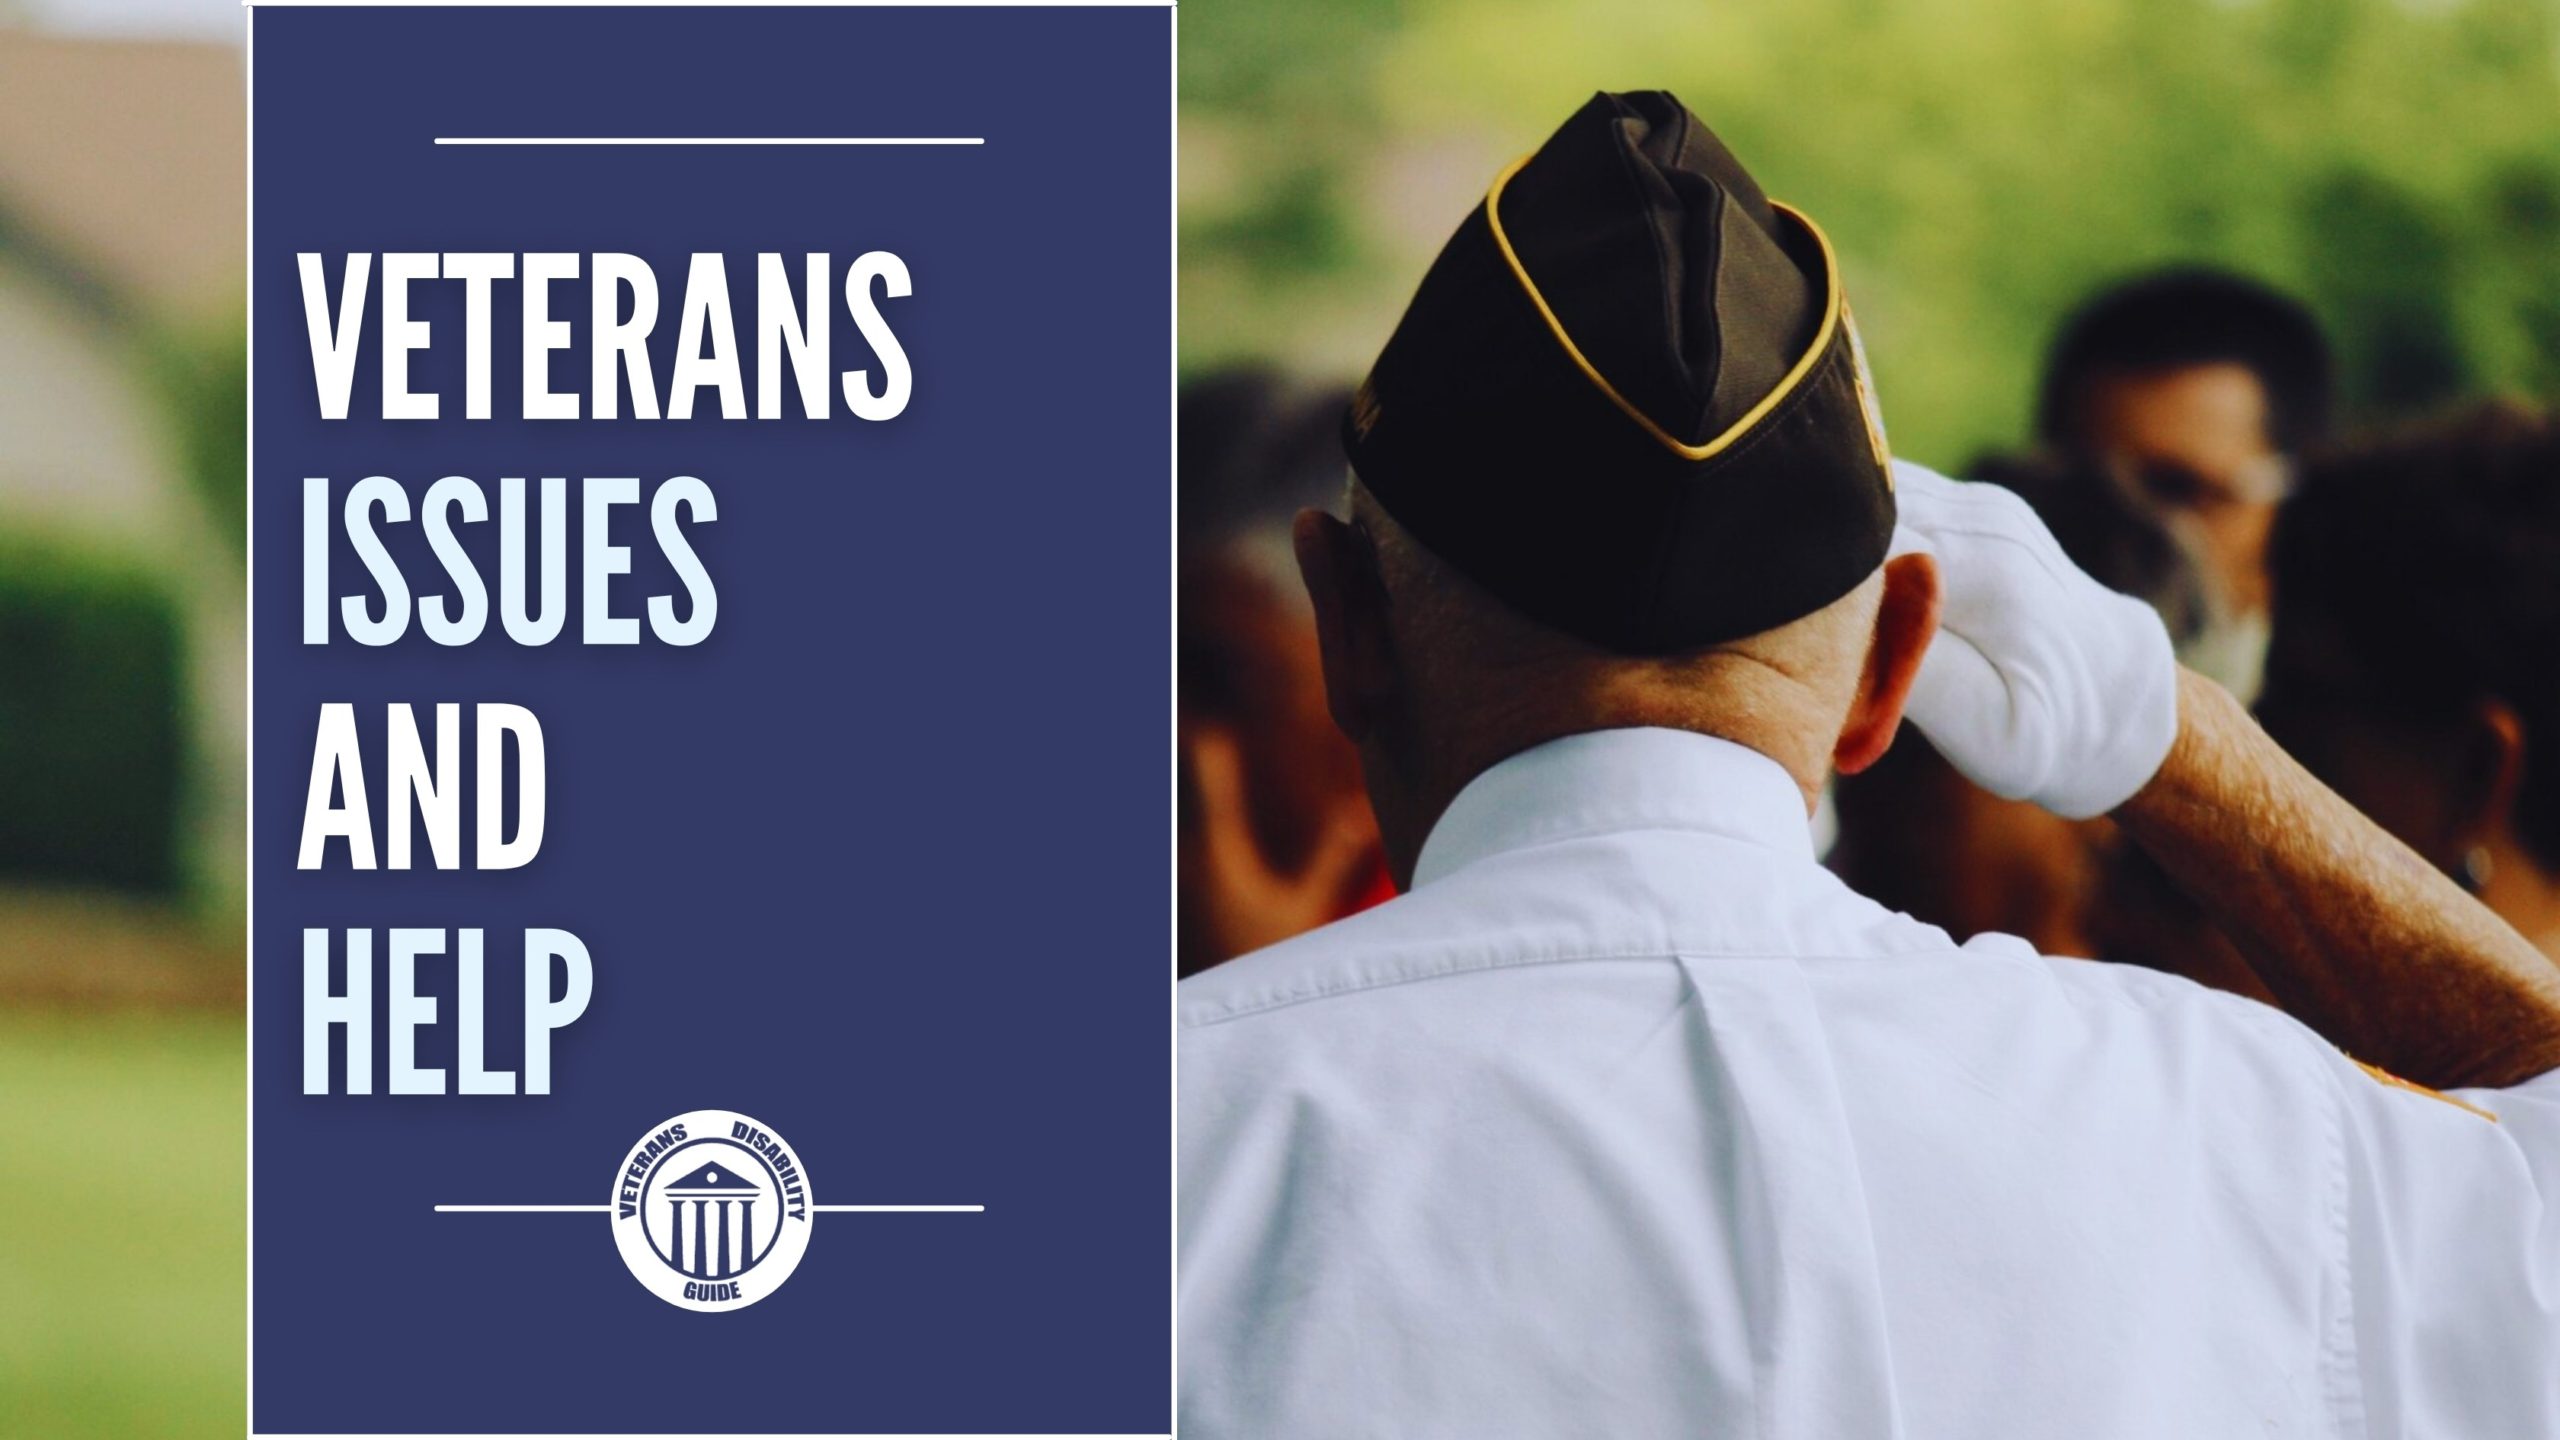 Veterans Issues And Help blog header image